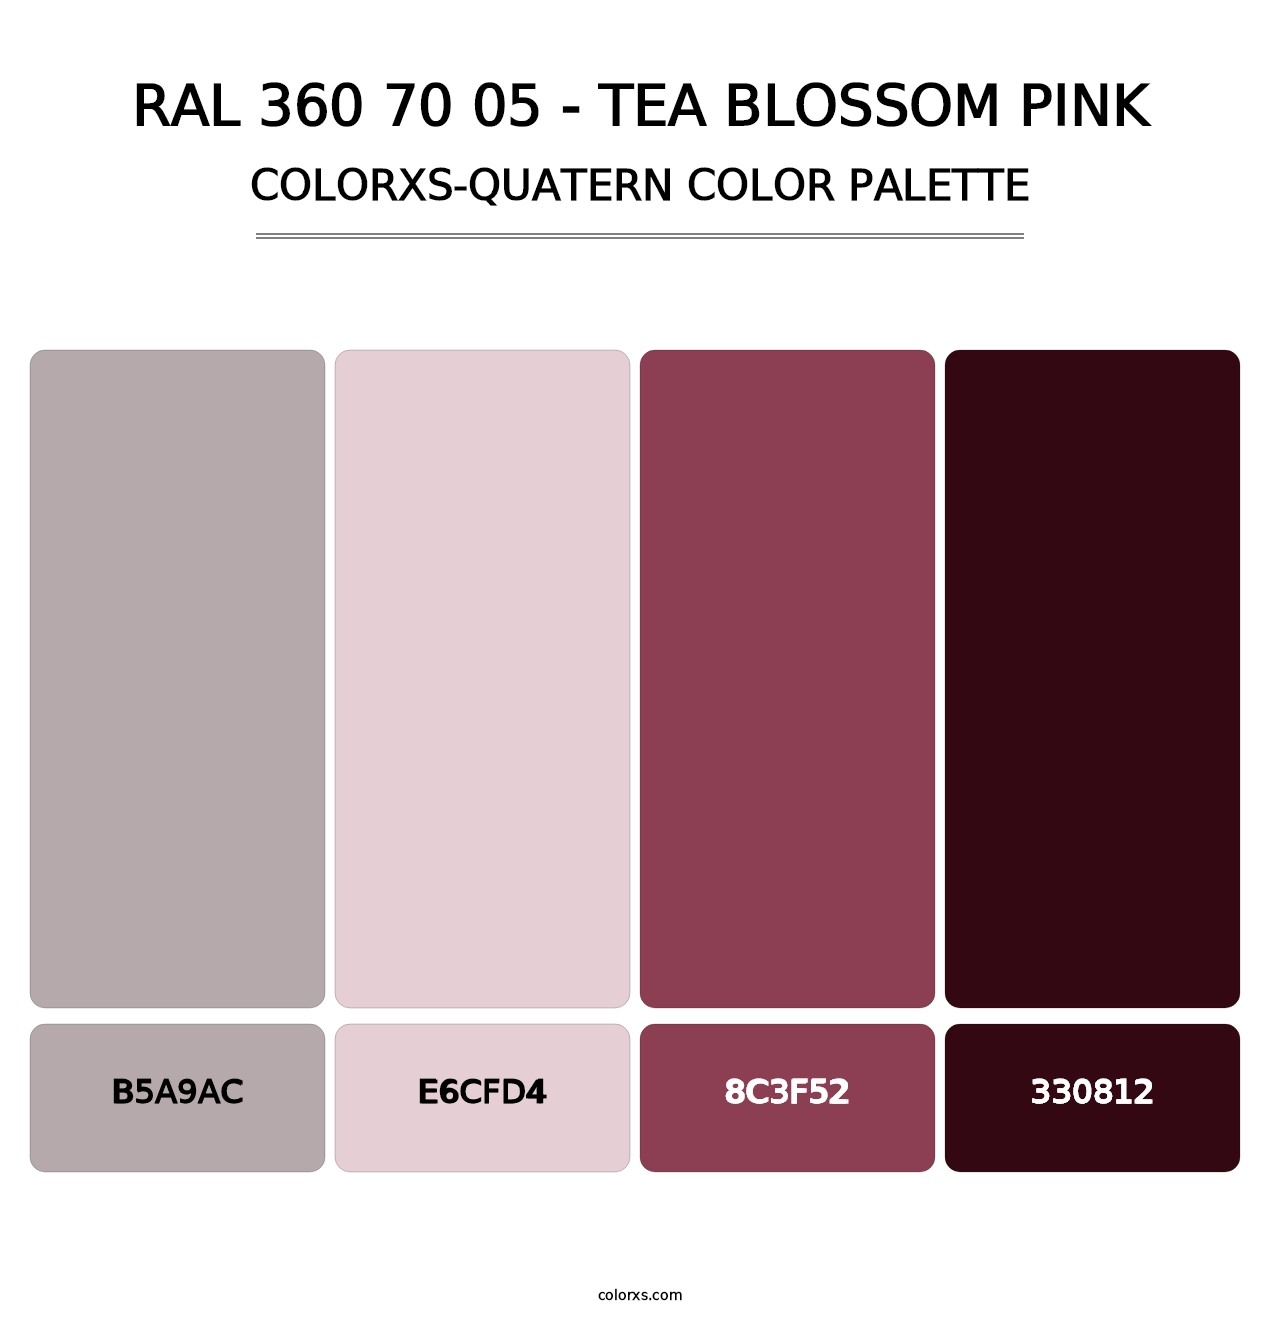 RAL 360 70 05 - Tea Blossom Pink - Colorxs Quatern Palette